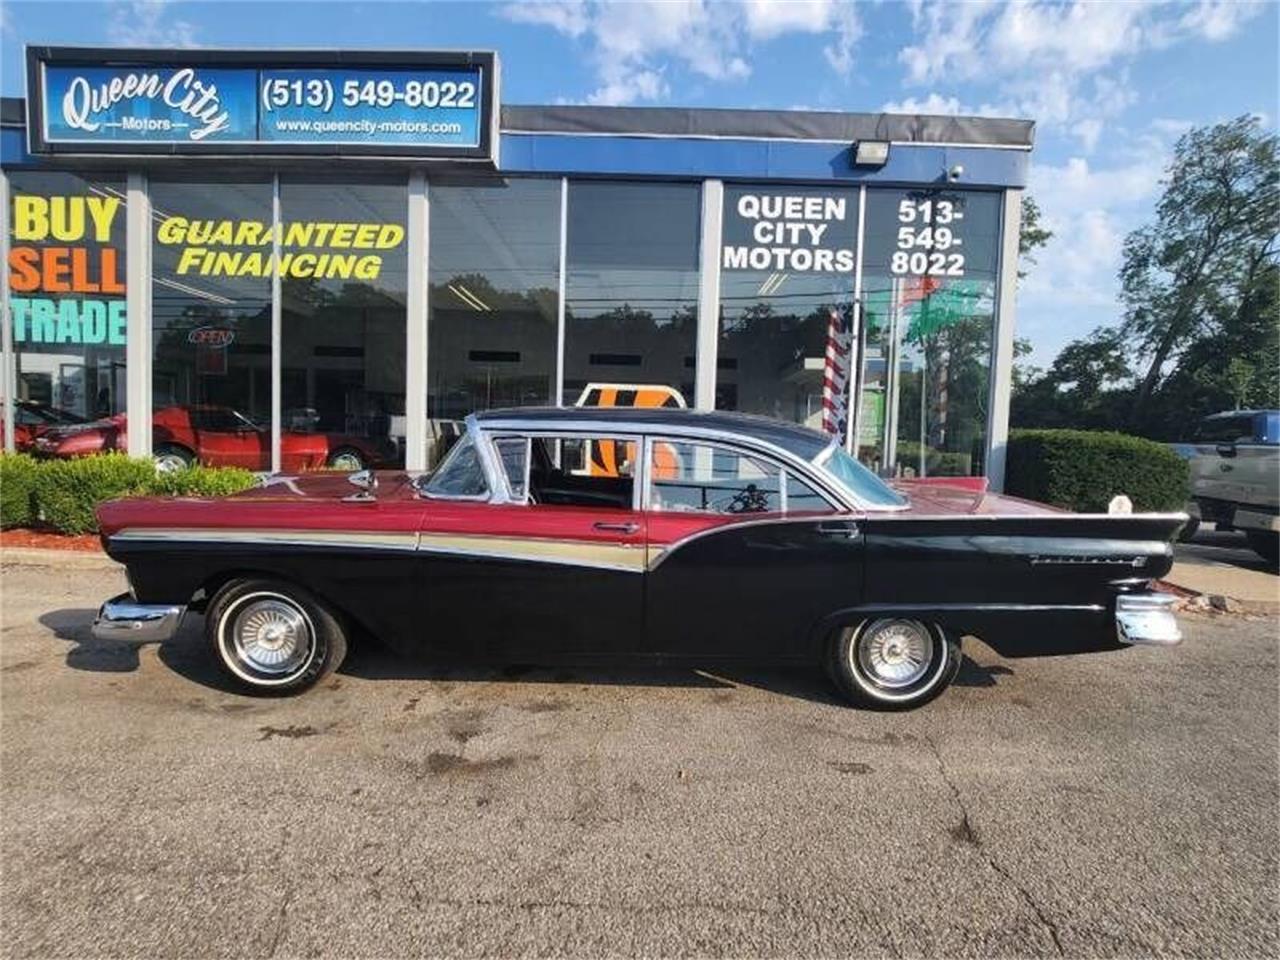 For Sale: 1957 Ford Fairlane in Loveland, Ohio for sale in Loveland, OH